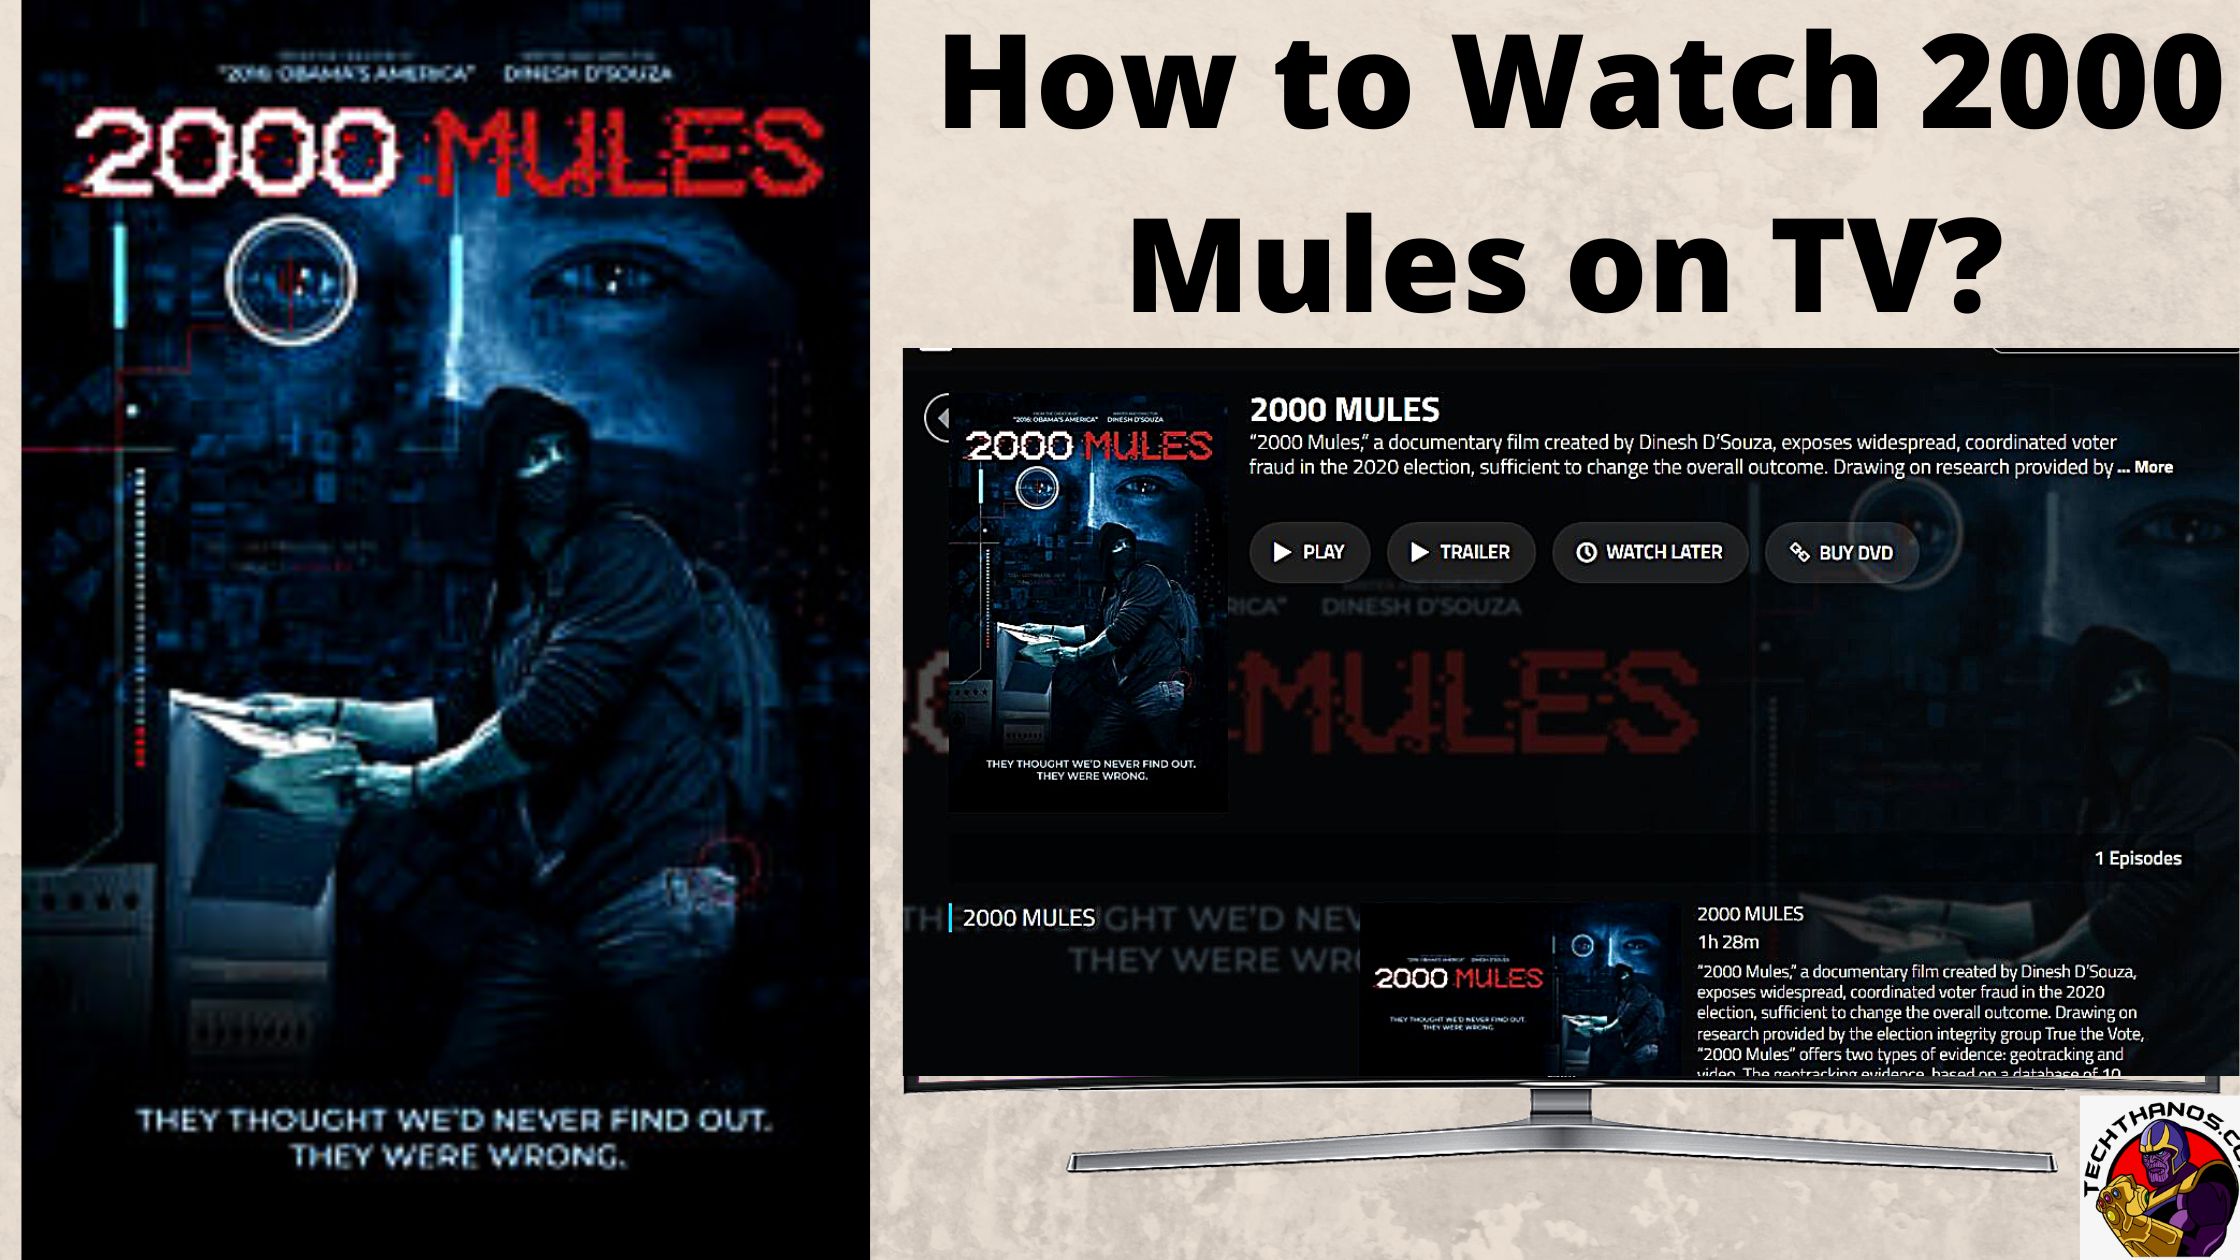 How to Watch 2000 Mules on TV 